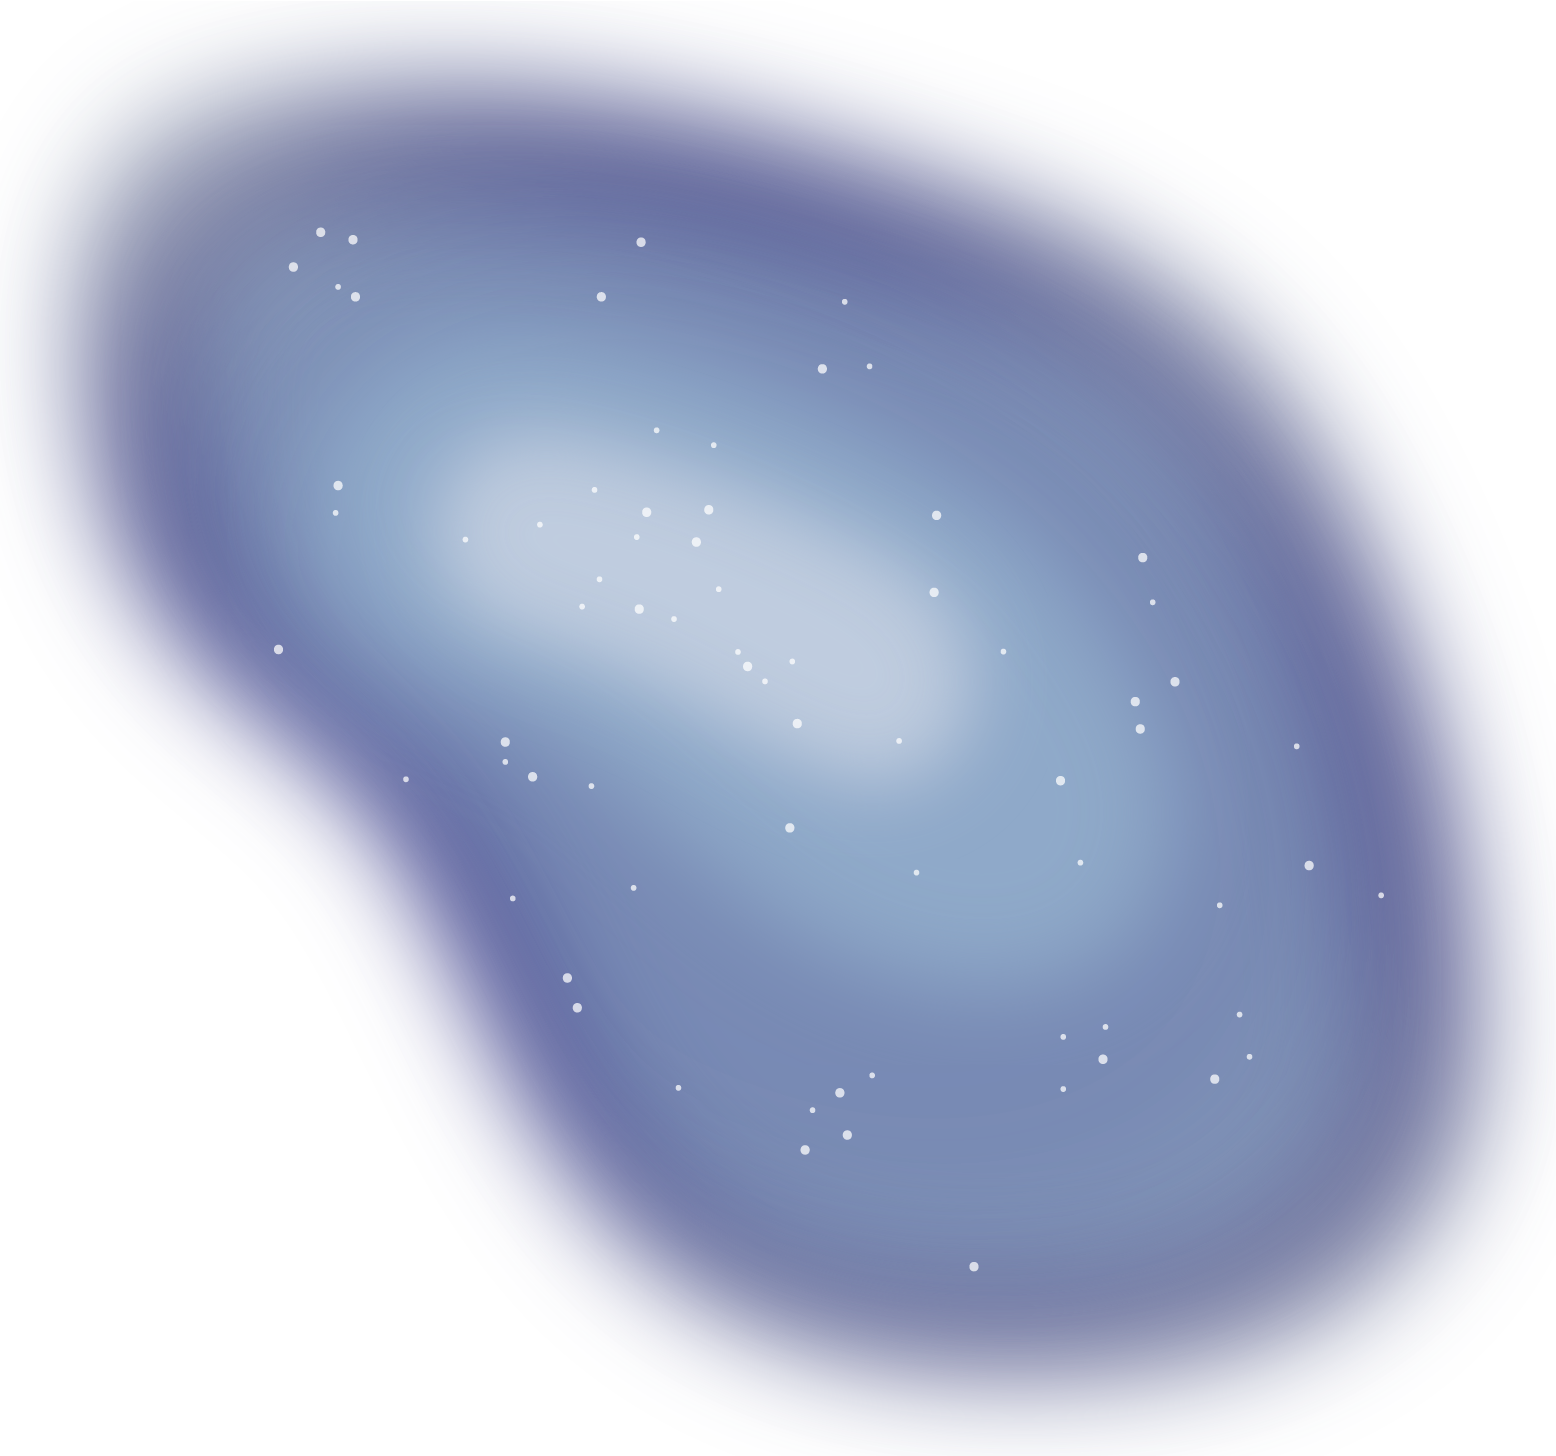 An amorphous, bean-shaped diffuse purple blob that's darker around the rim with a light, whitish center. White dots representing stars speckle the image.